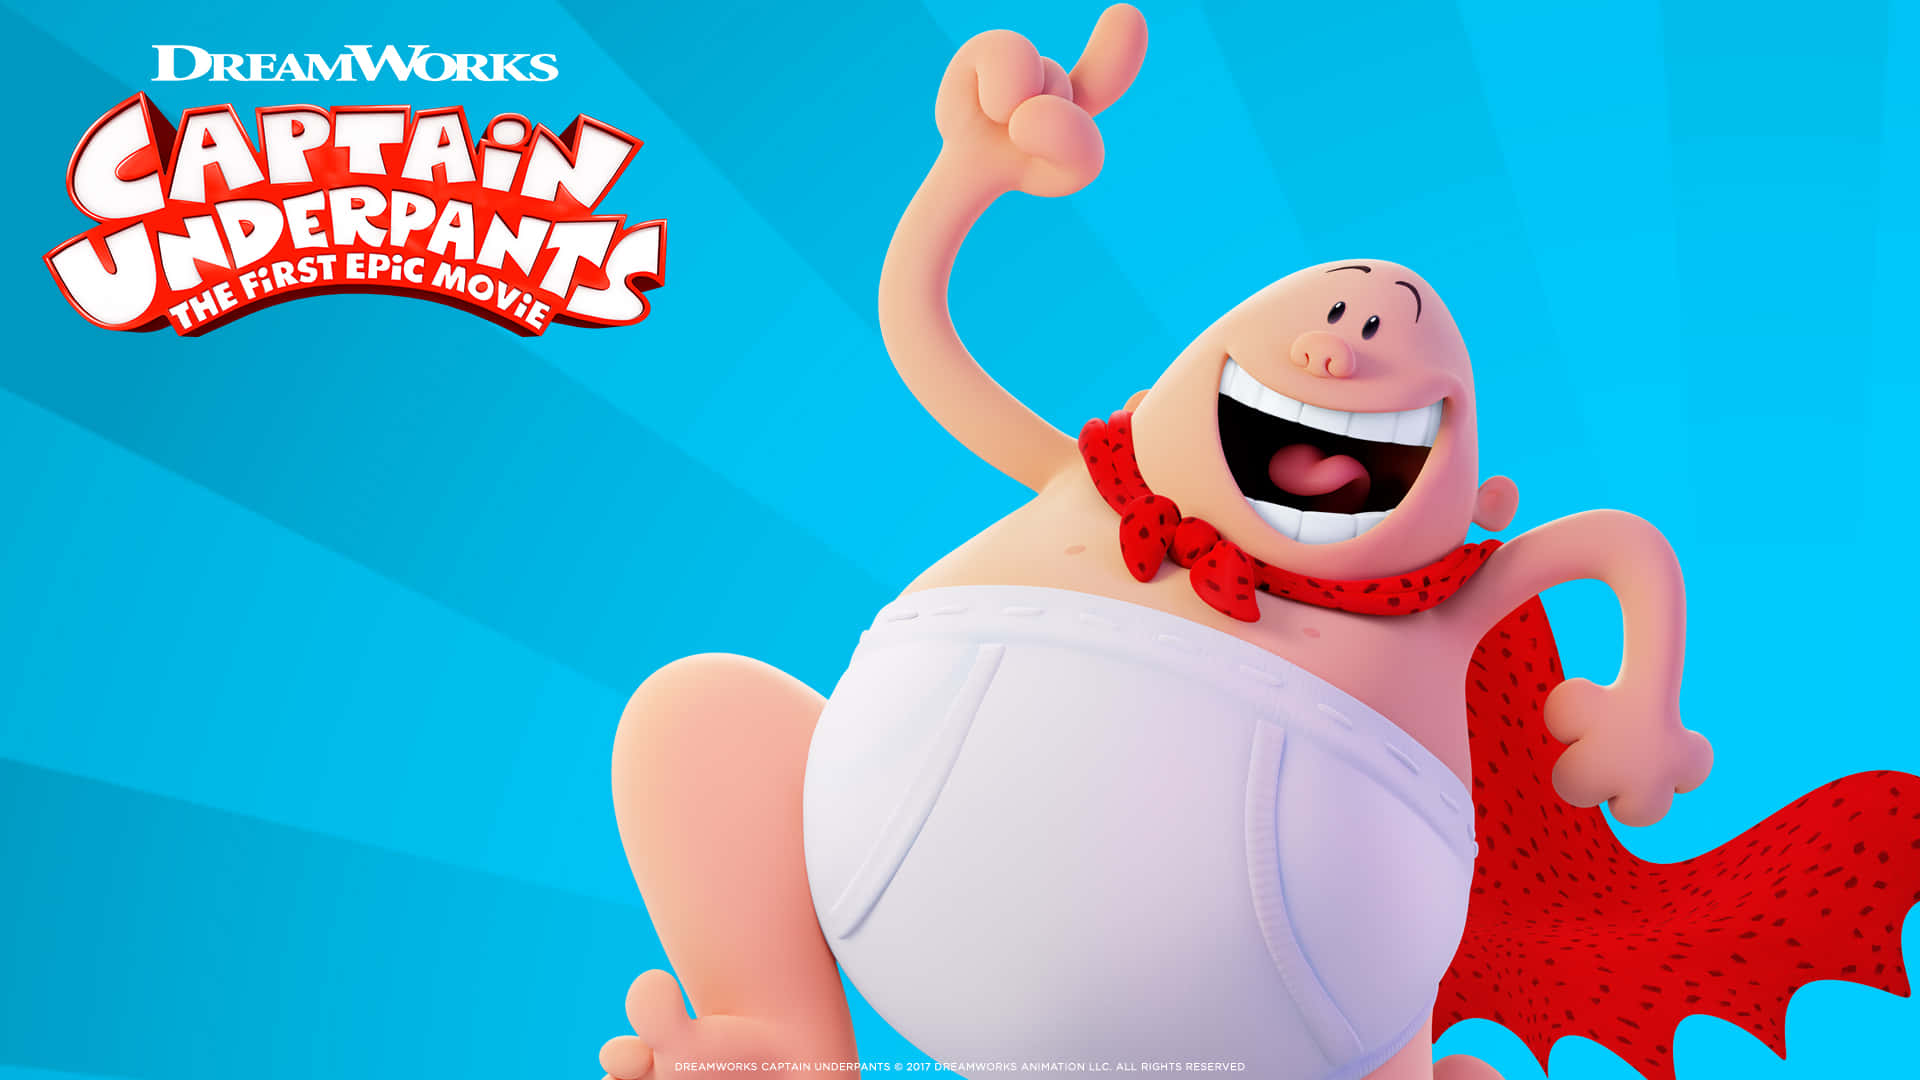 Pointing Finger Up Captain Underpants: The First Epic Movie Wallpaper